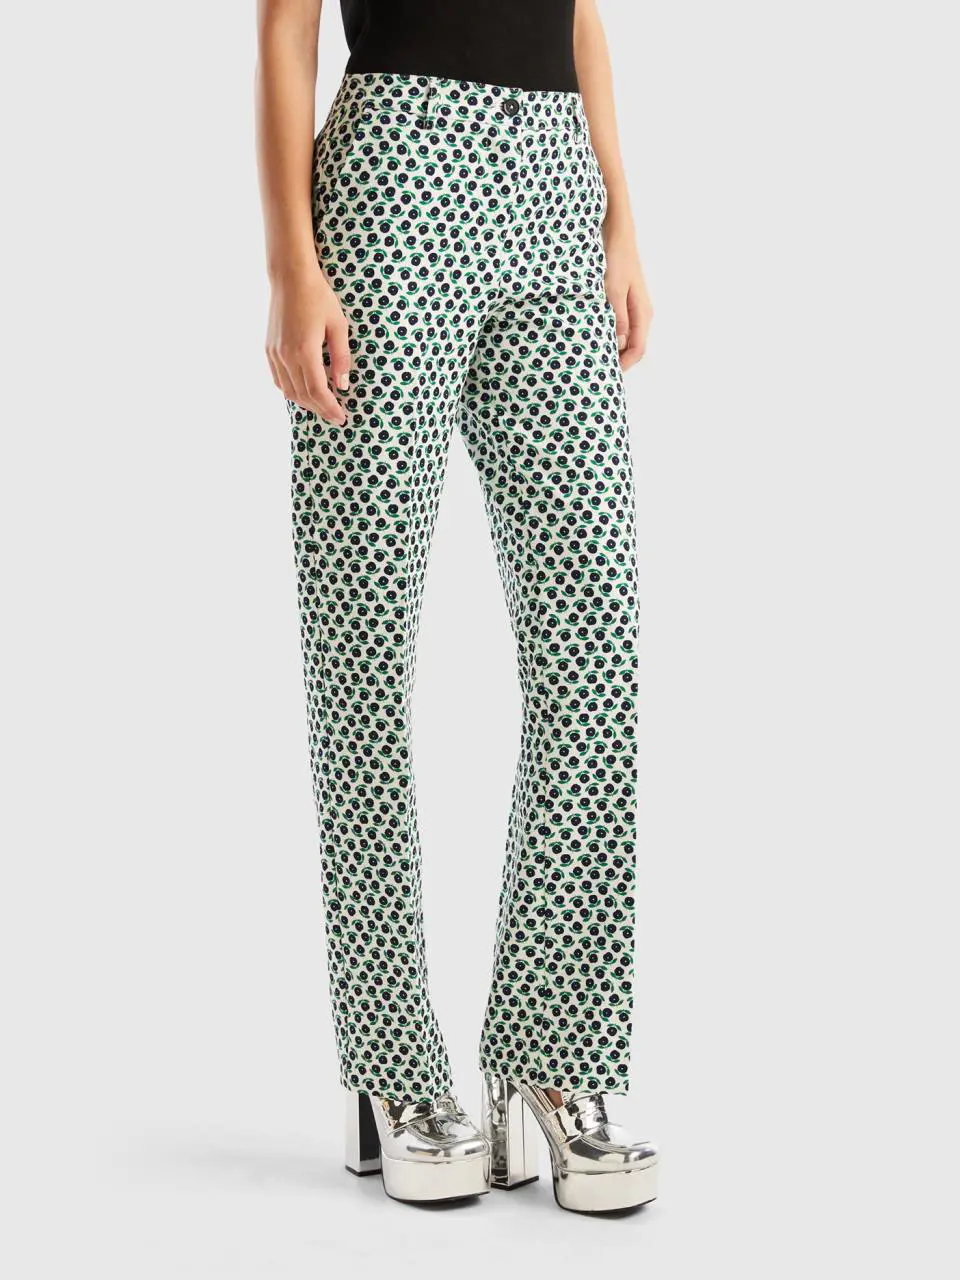 Benetton trousers with flower print. 1